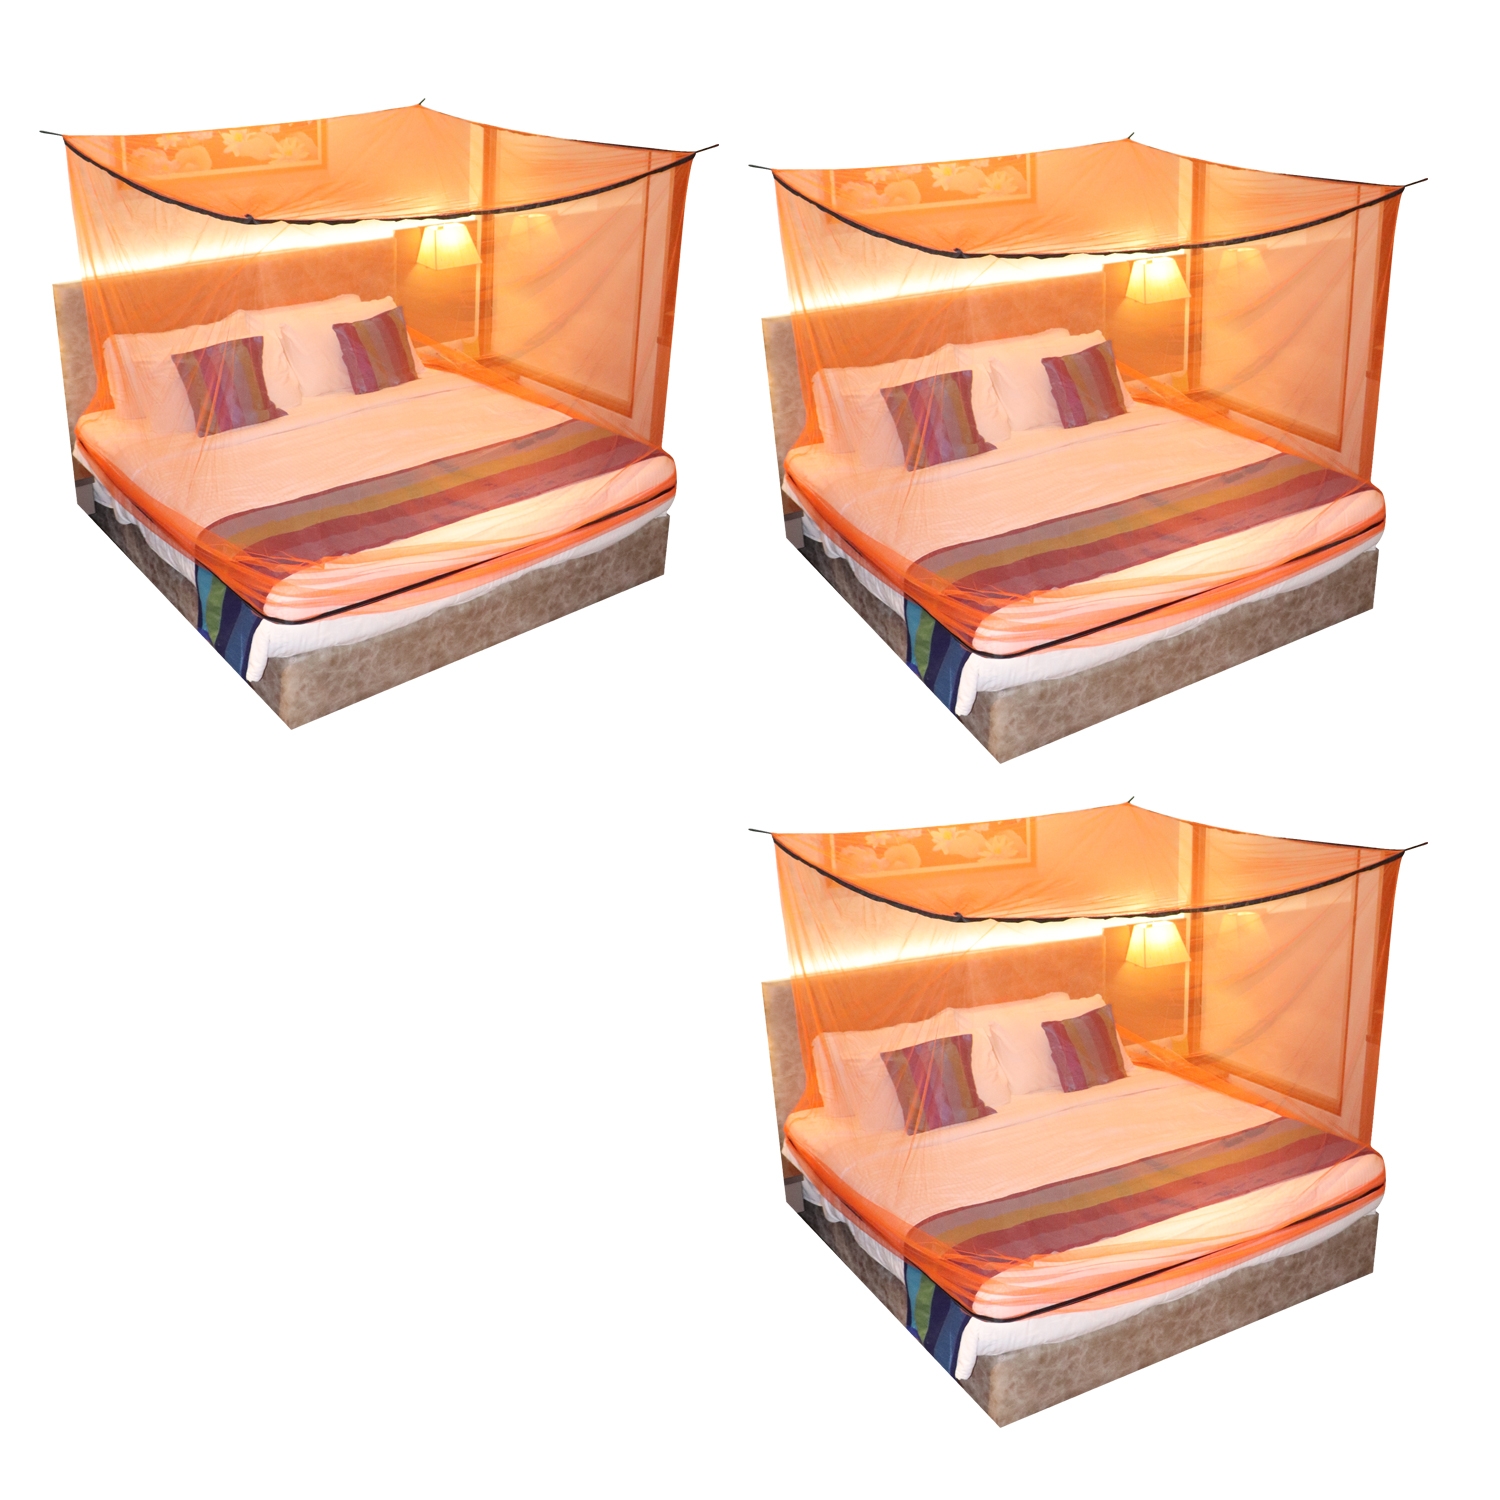 Paola Jewels | Mosquito Net for Double Bed, King-Size, Square Hanging Foldable Polyester Net Orange And Black Pack of 3 3